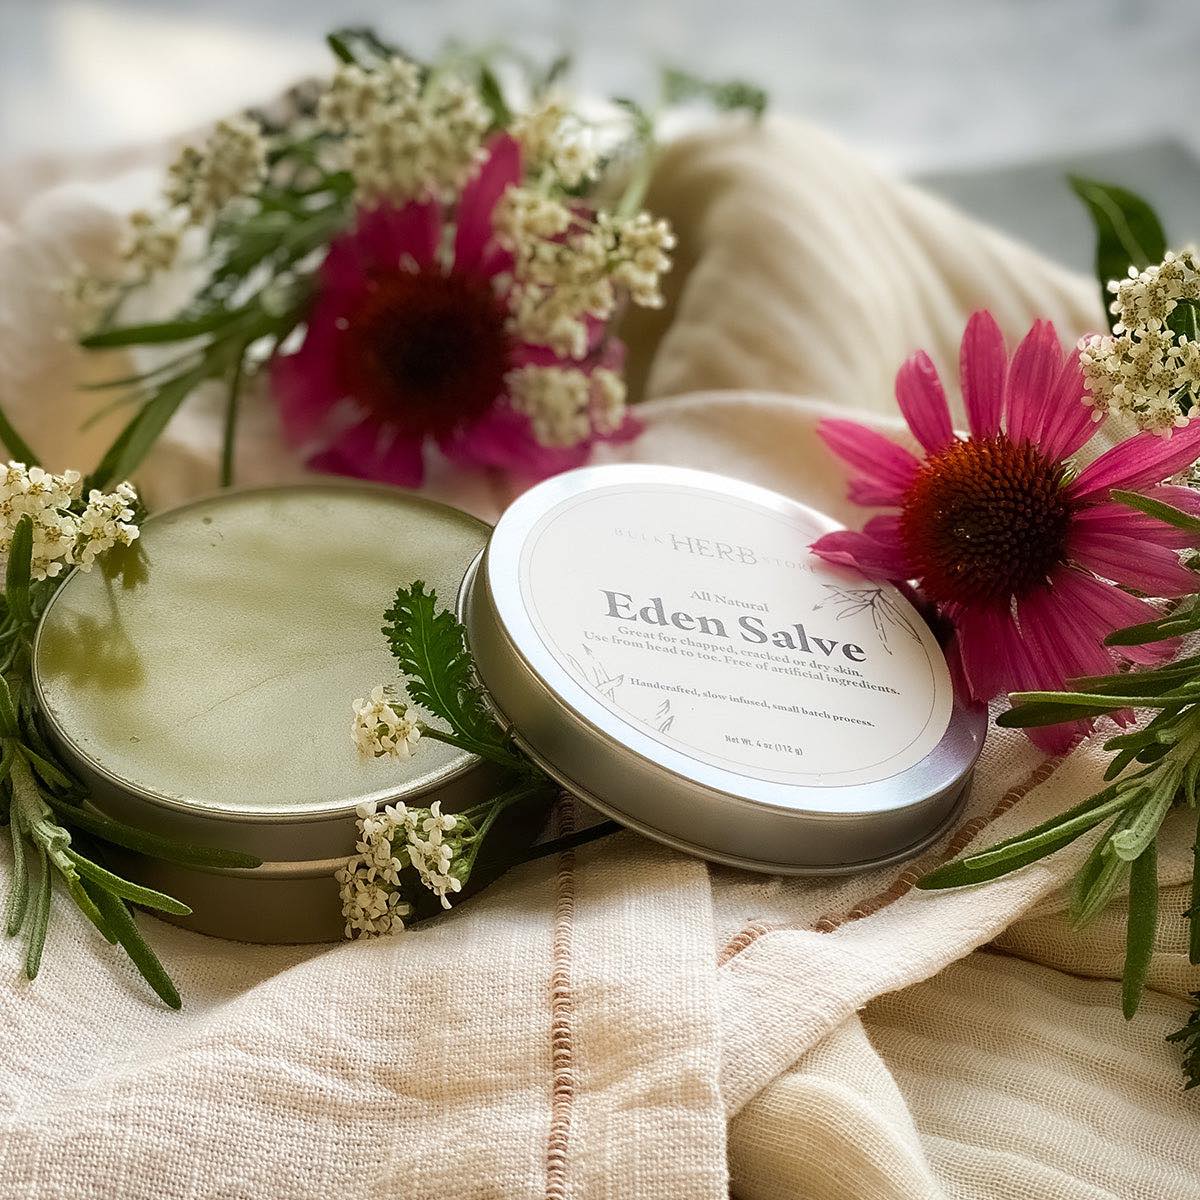 An open tin of Eden Salve rests on a linen cloth with flowers and herbs.